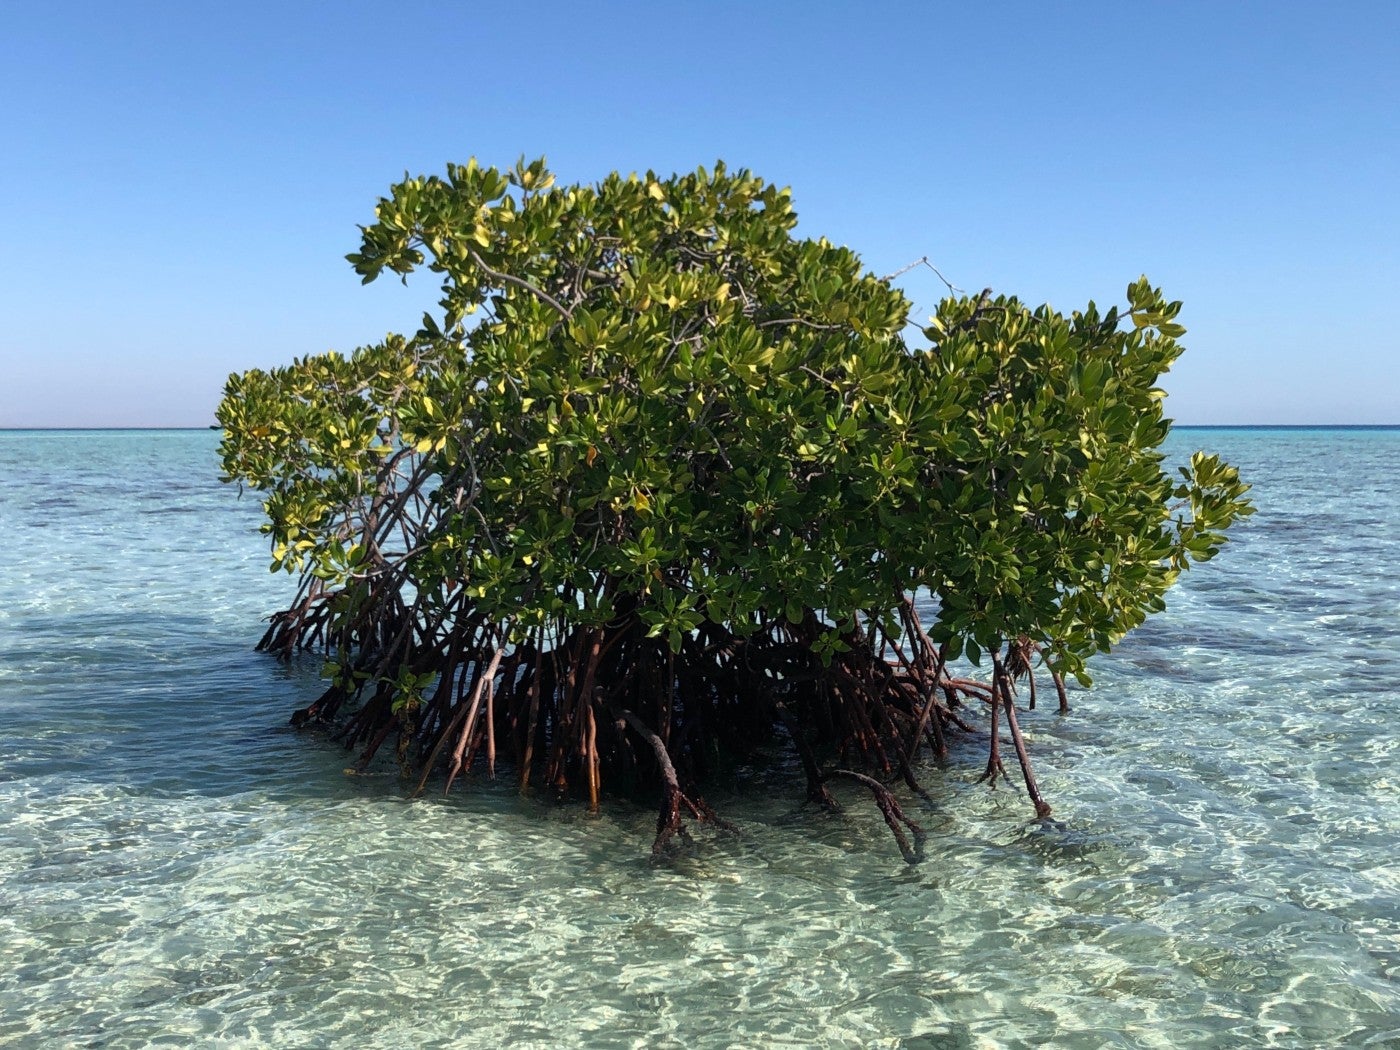 Red mangroves growing in the Red Sea off the coast of Saudi Arabia